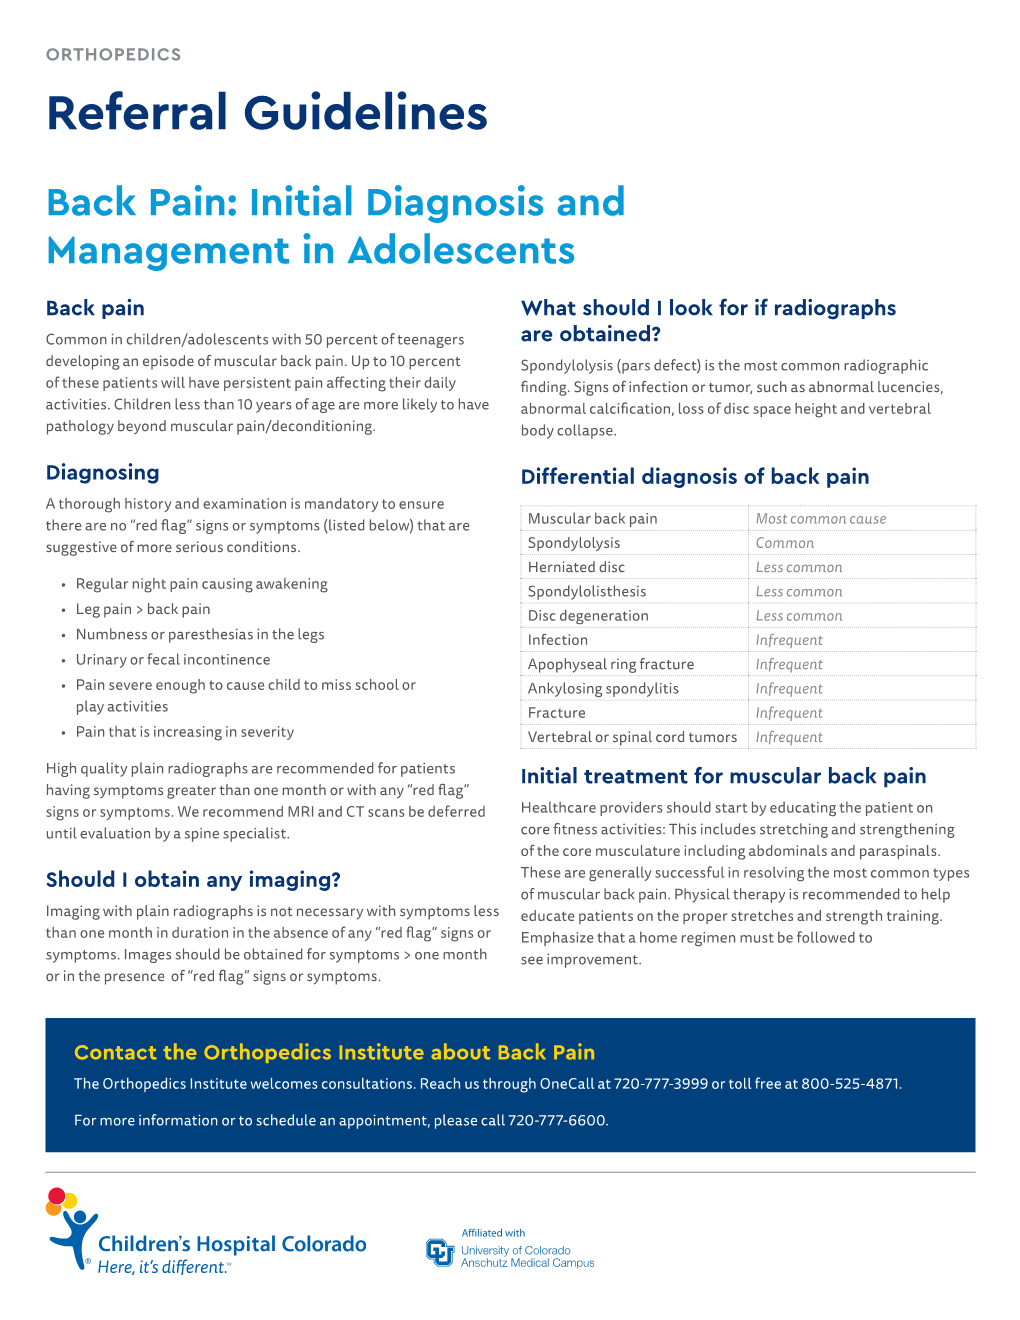 Back Pain Referral Guidelines